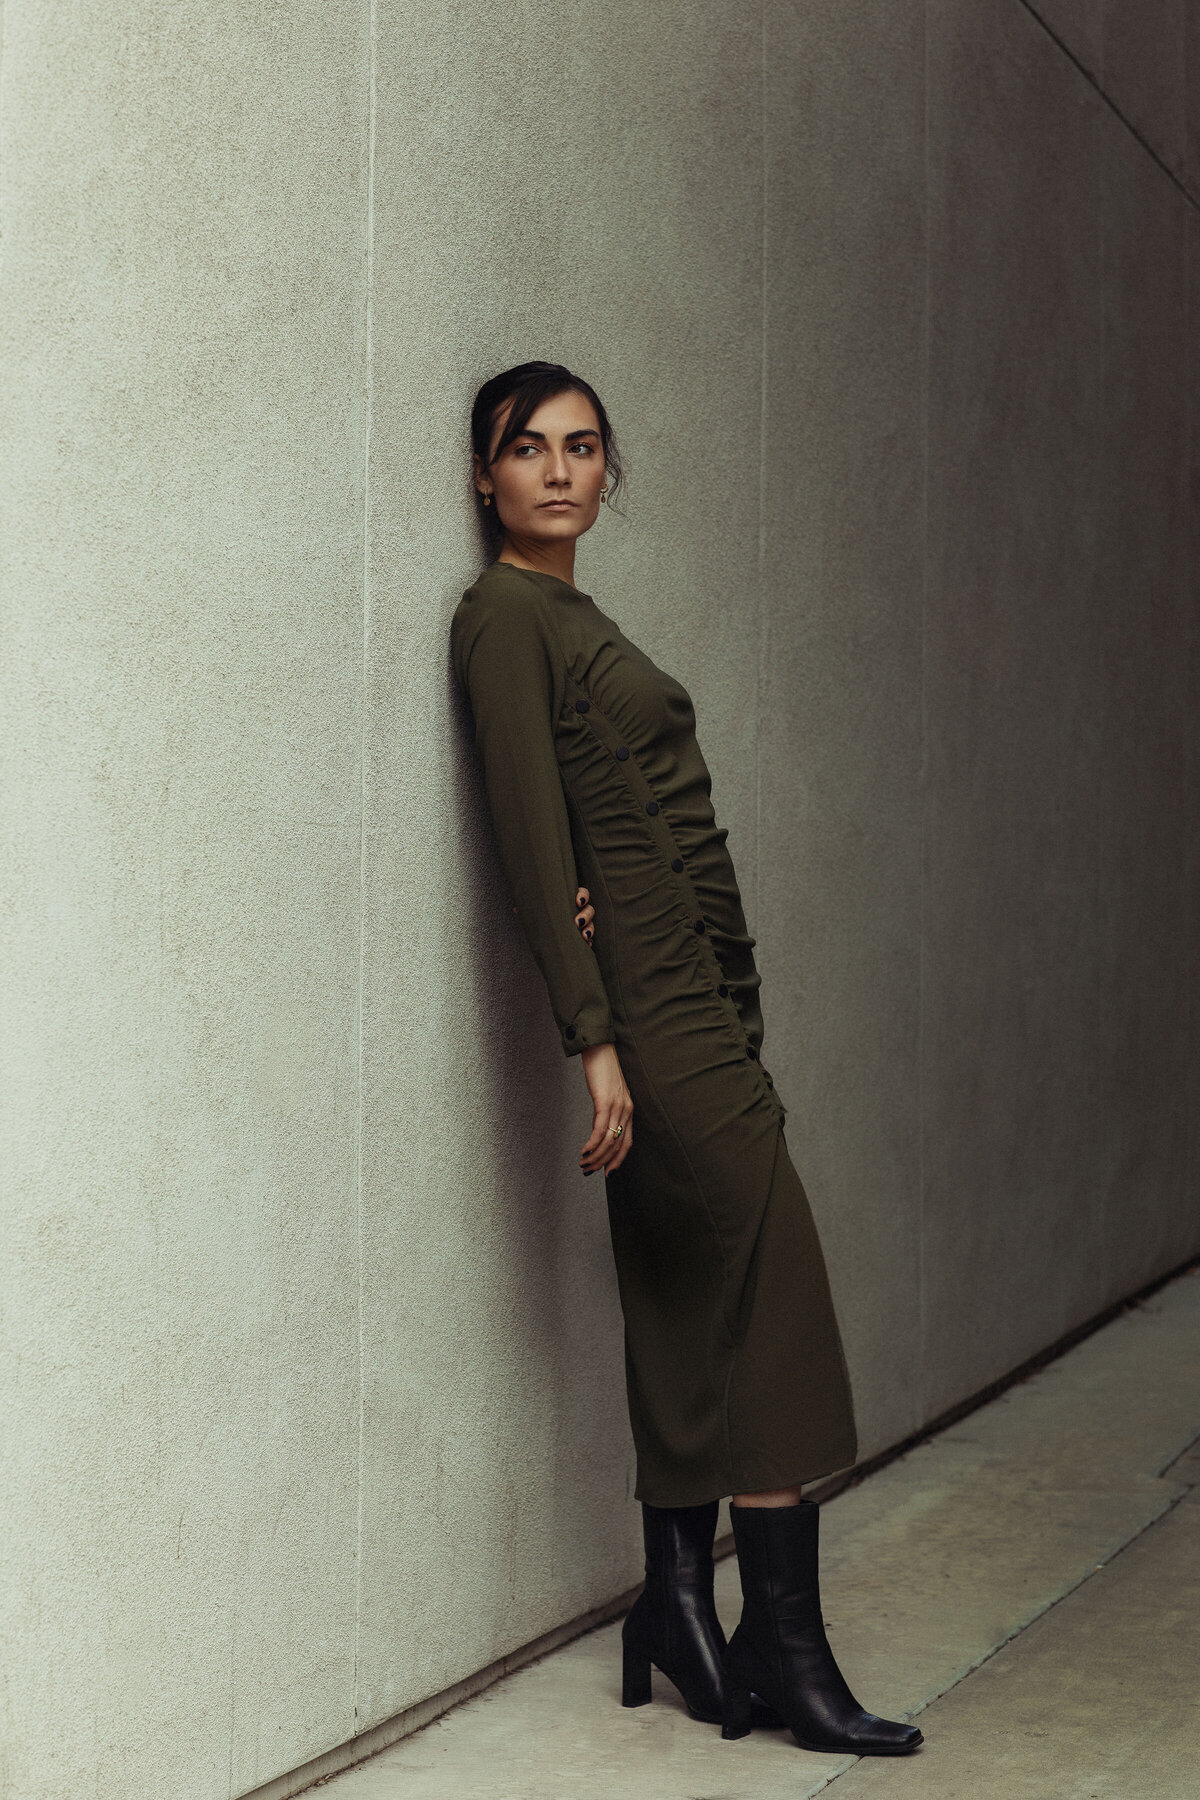 Portrait Photo Of Young Woman In Dark Green Dress Los Angeles